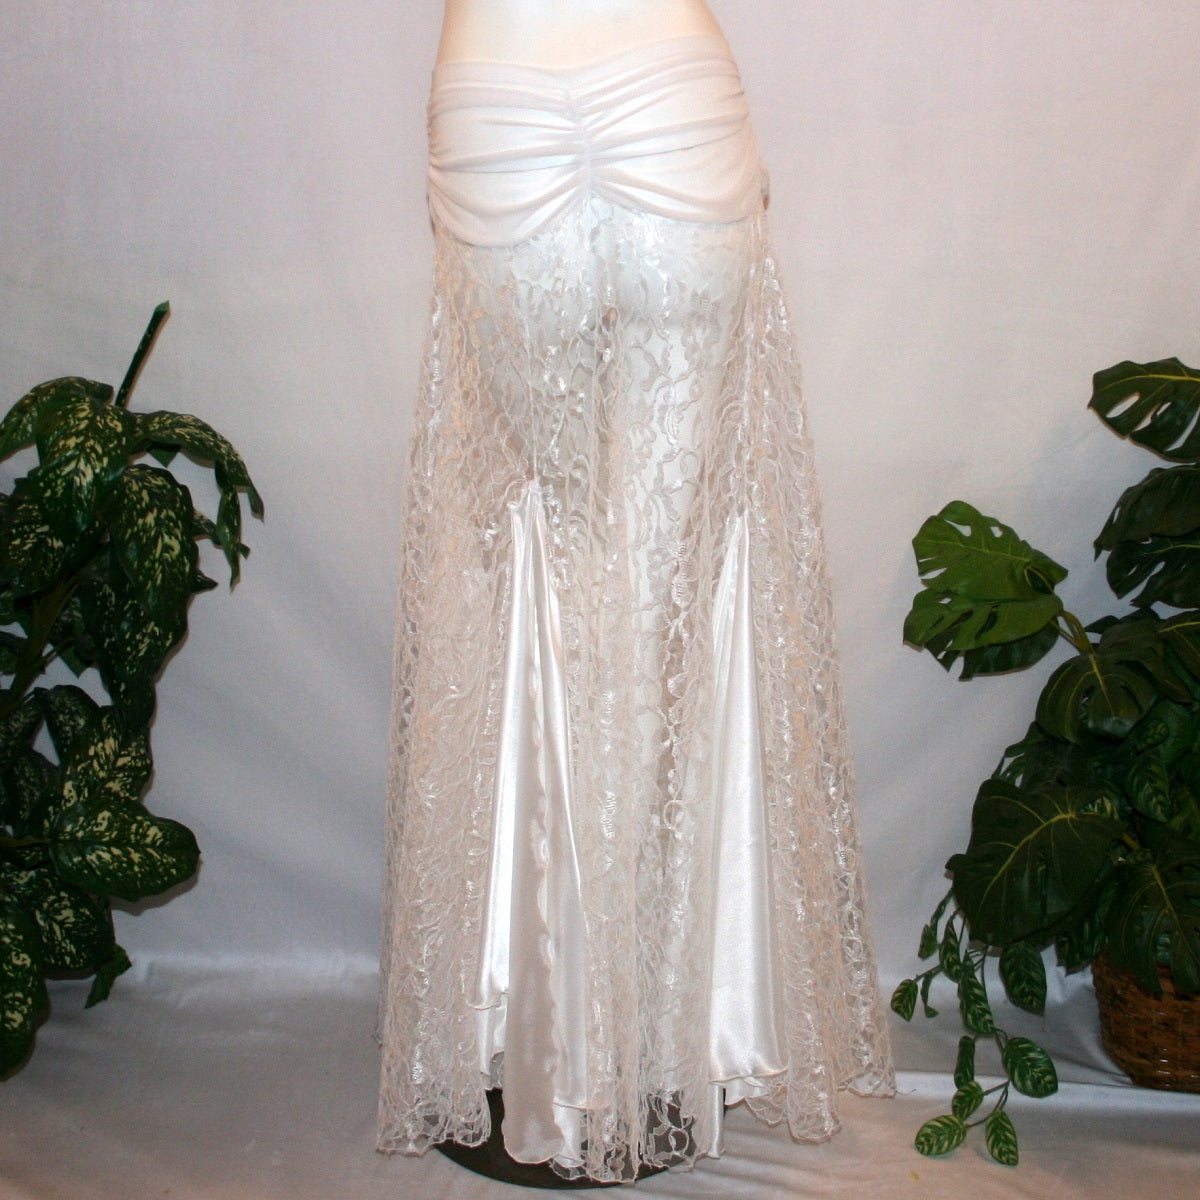 back view of White ballroom skirt created of yards of white lace with a white sheer stretch mesh ruched hip band, has inset panels & floats of white stretch satin.